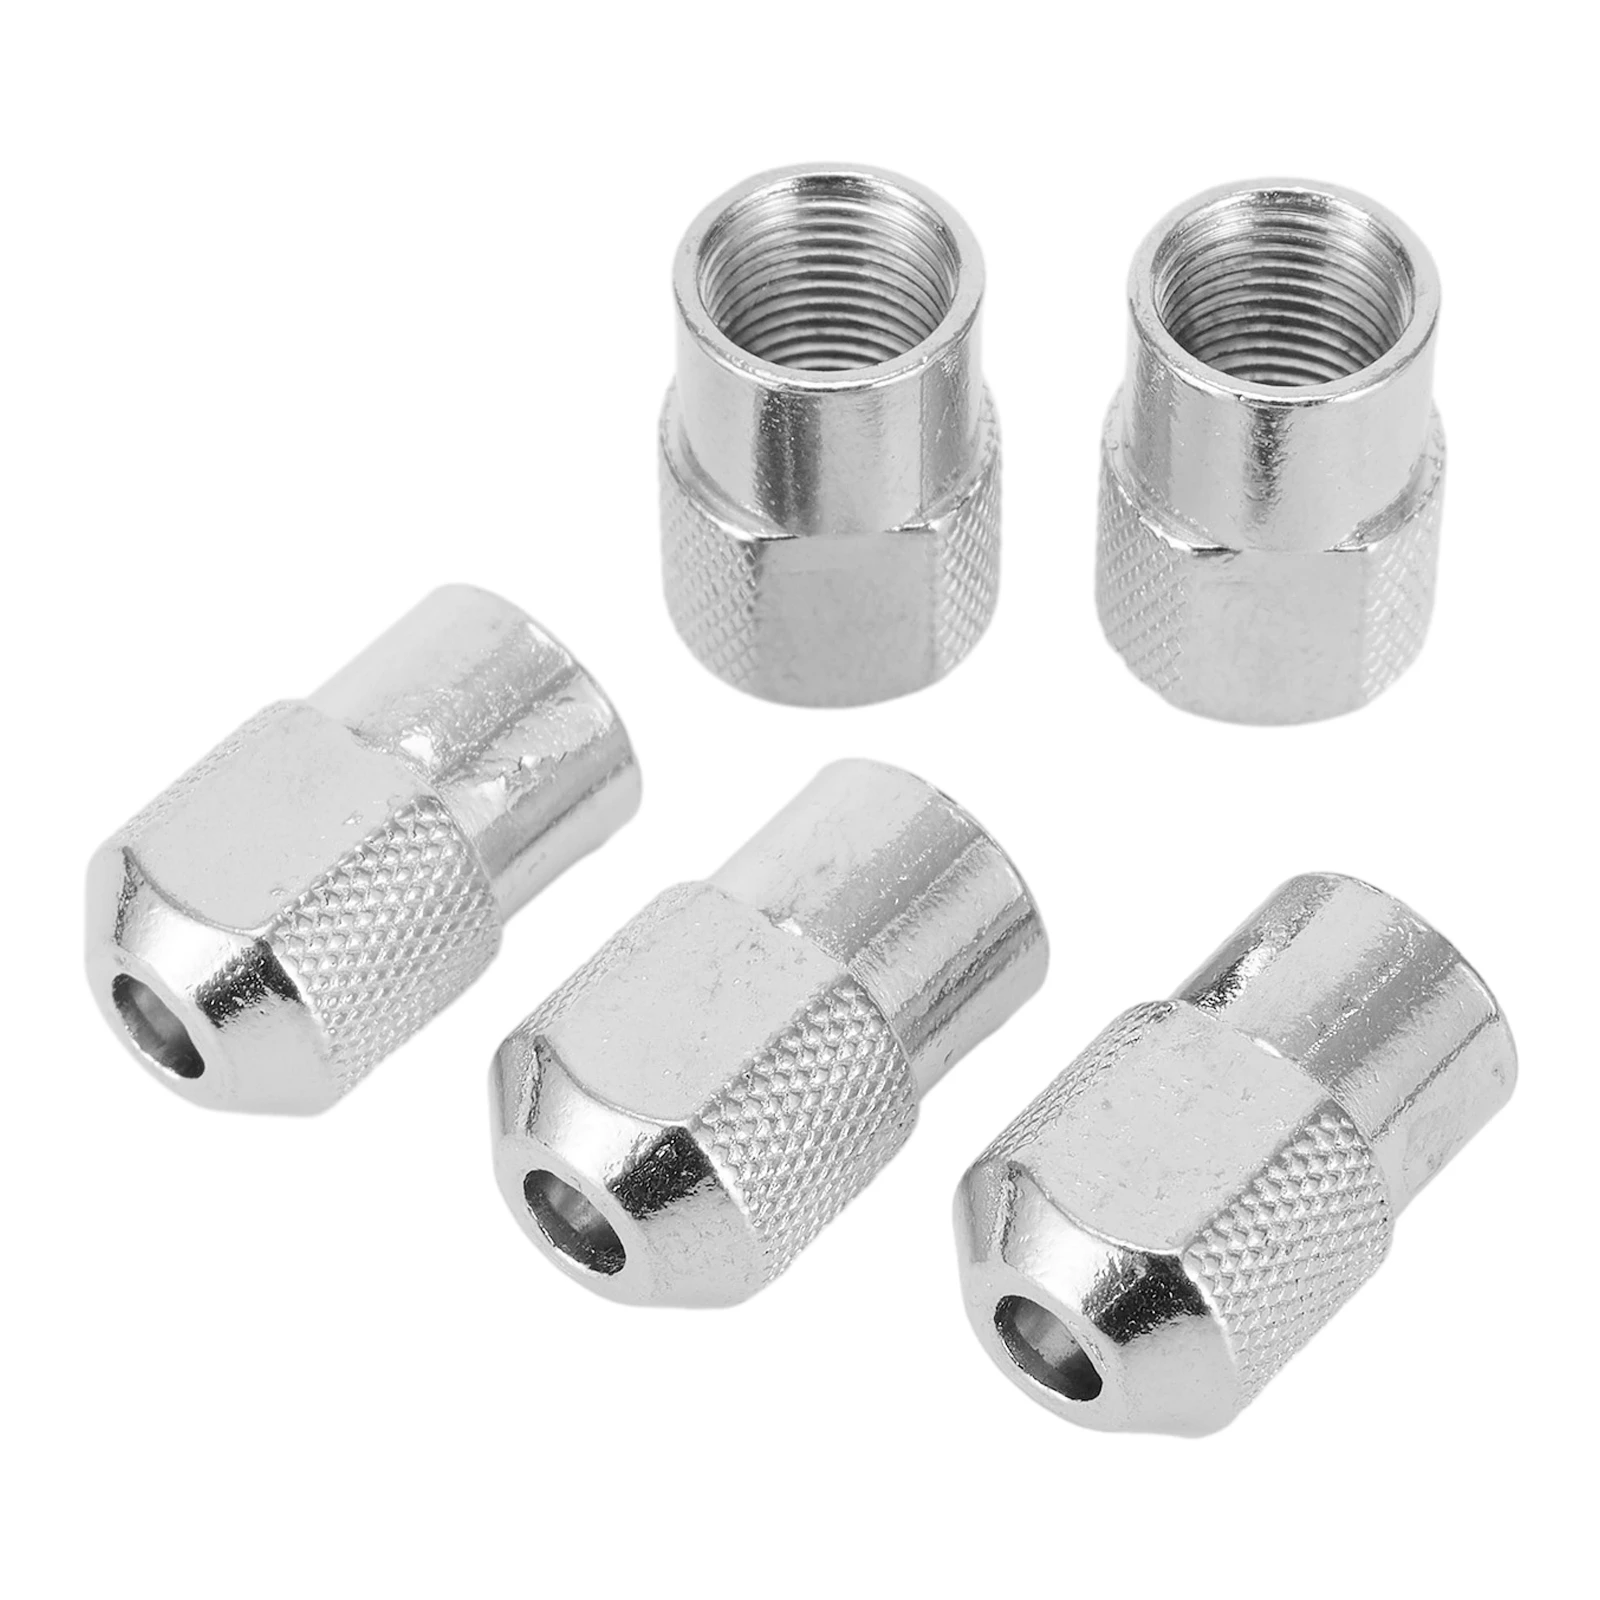 5PCS Chuck Nut Mill Shaft Screw Cap Nut For Electric Grinder M8*0.75mm Electric Mill Grinder Most Rotary Tools Accessories 5 pcs drill chuck nut m8 0 75mm zinc alloy screw bolt grinding head holder for rotary tools electric grinder accessories